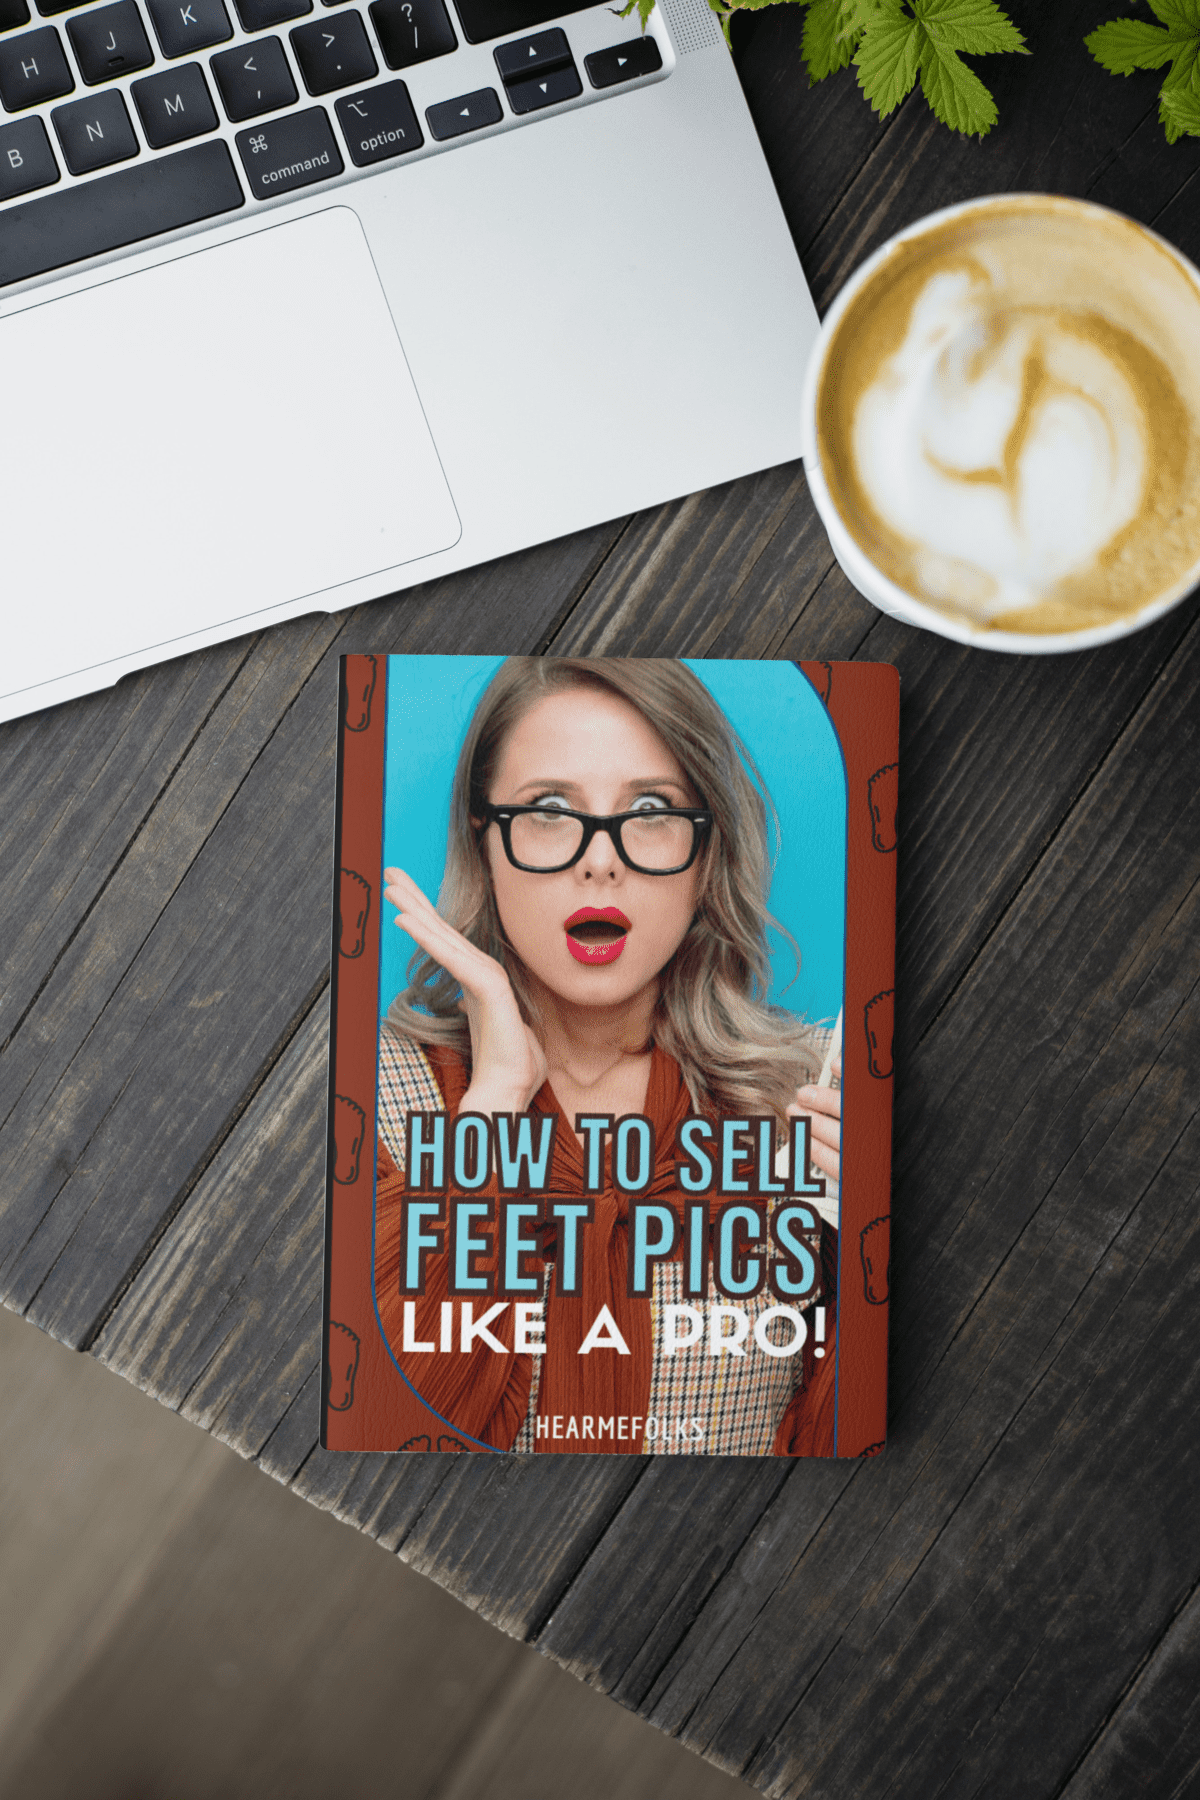 How to Sell Feet Pics